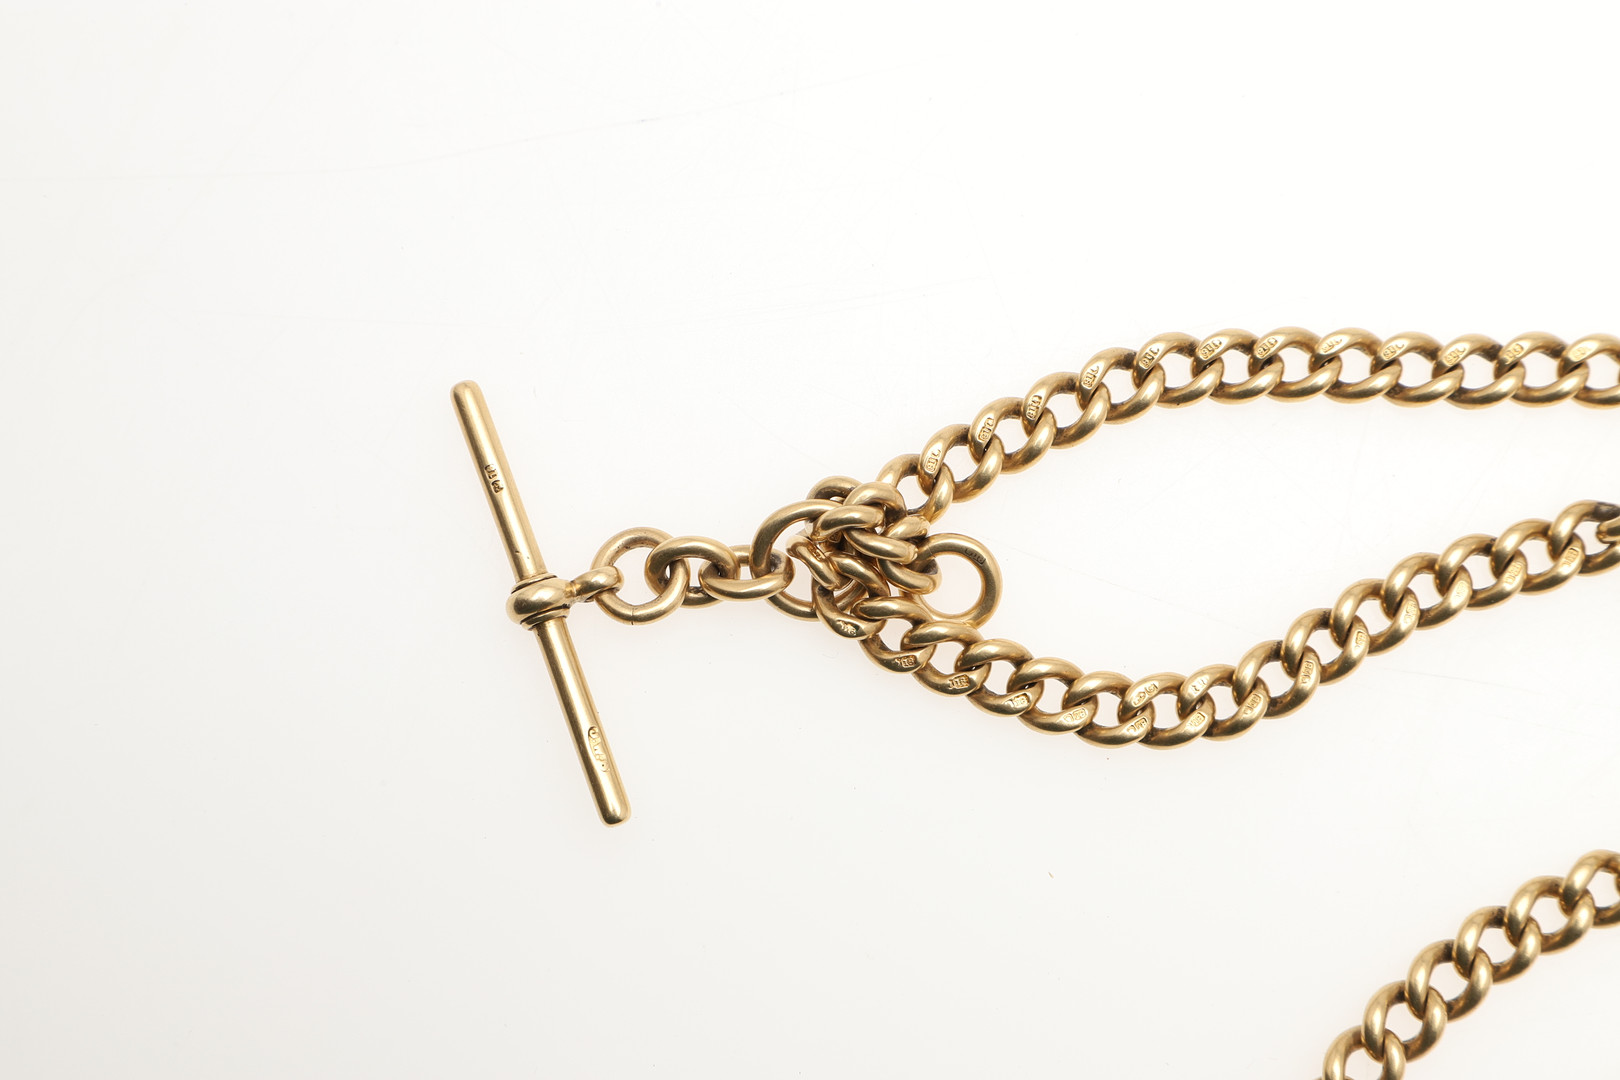 AN 18CT GOLD CURB LINK WATCH CHAIN. - Image 2 of 2